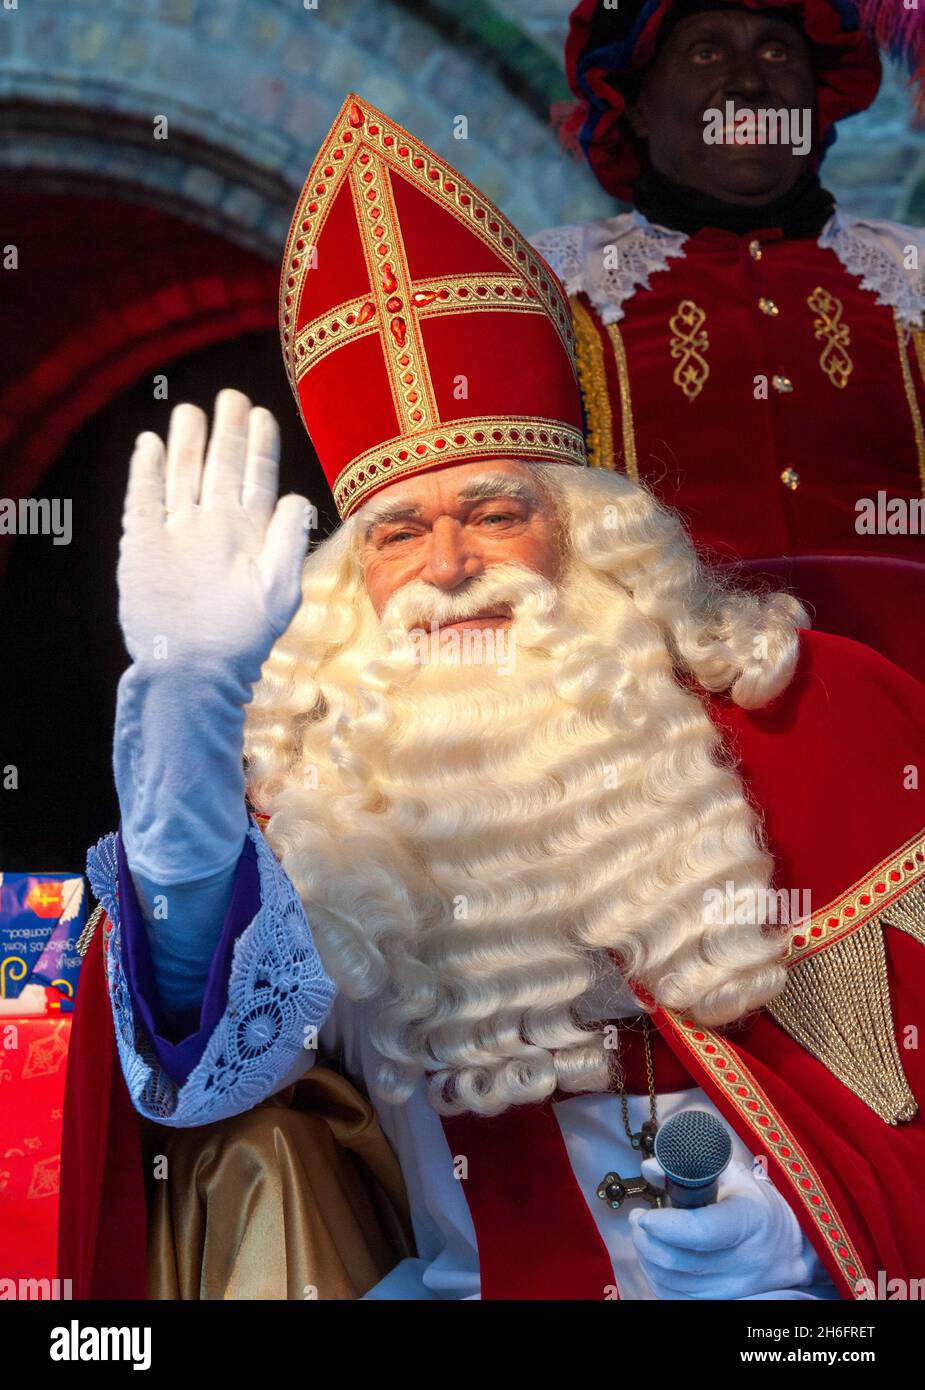 ENSCHEDE, THE NETHERLANDS - NOV 13, 2021: Portrait of the the dutch Santa Claus called 'Sinterklaas' while he is arriving in town. Stock Photo